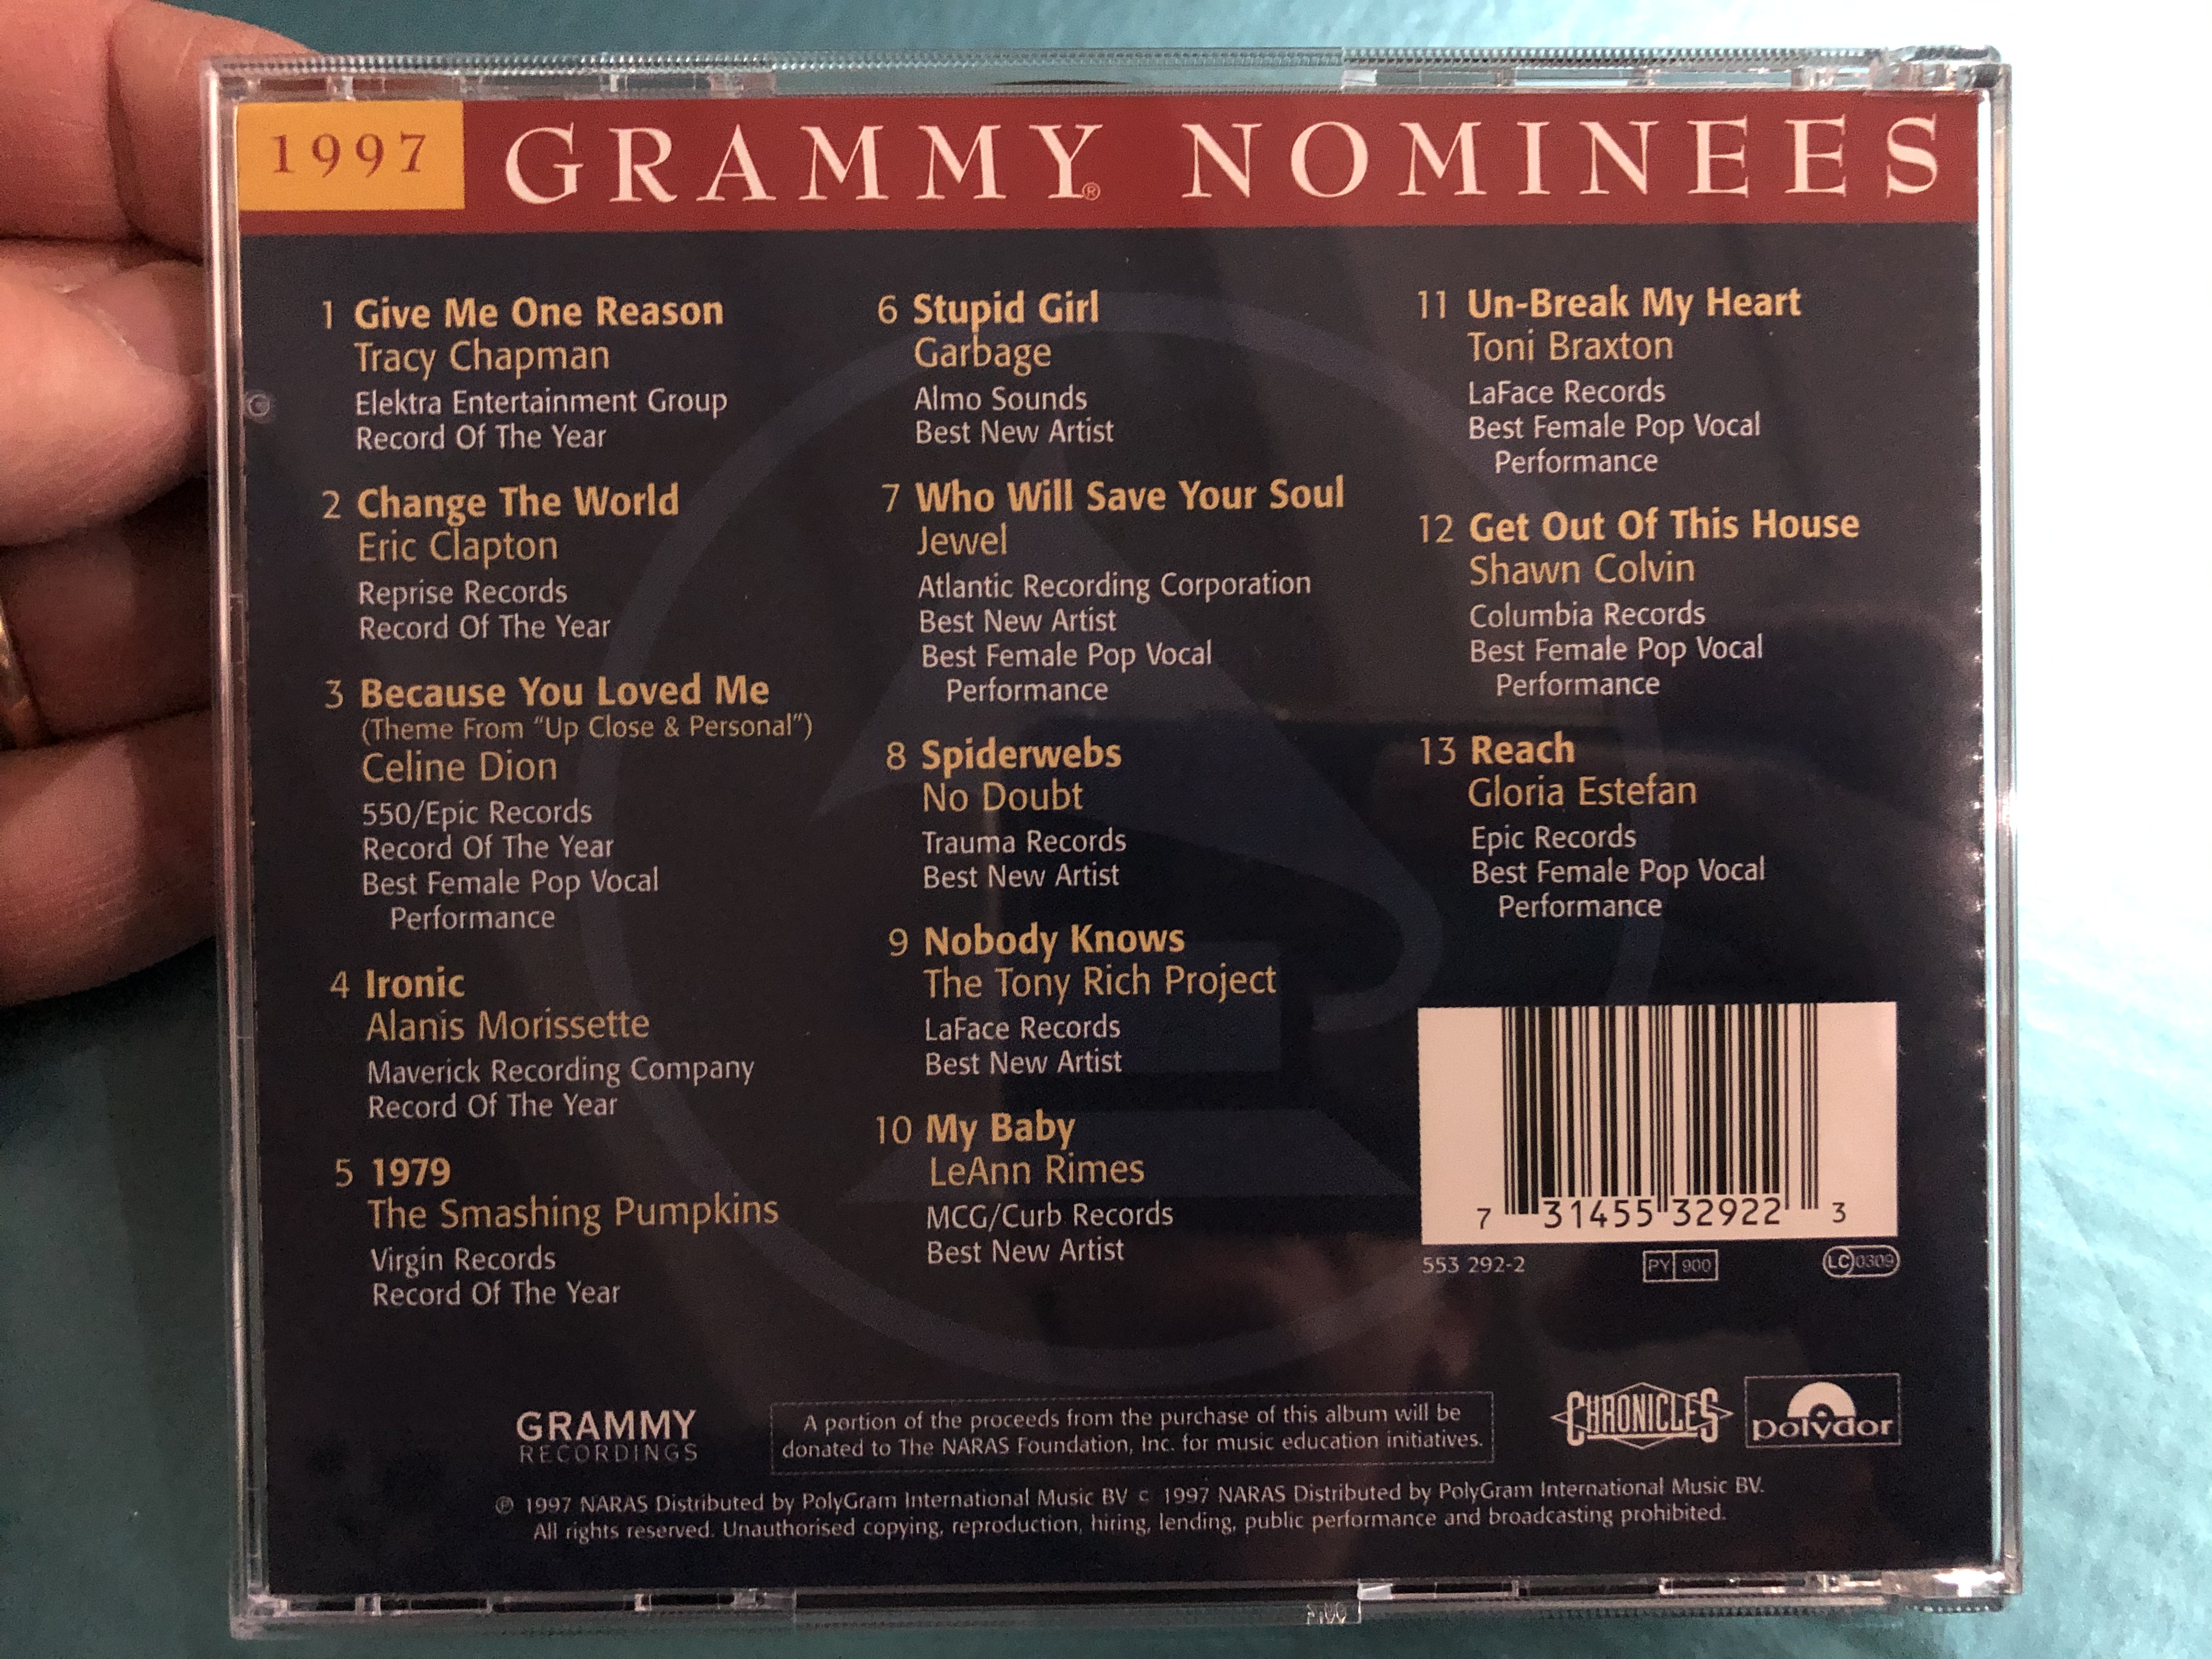 1997-grammy-nominees-1997-record-of-the-year-tracy-chapman-eric-clapton-celine-dion-alanis-morissette-the-smashing-pumpkins-1997-best-new-artist-garbage-jewel-no-doubt-grammy-record.jpg